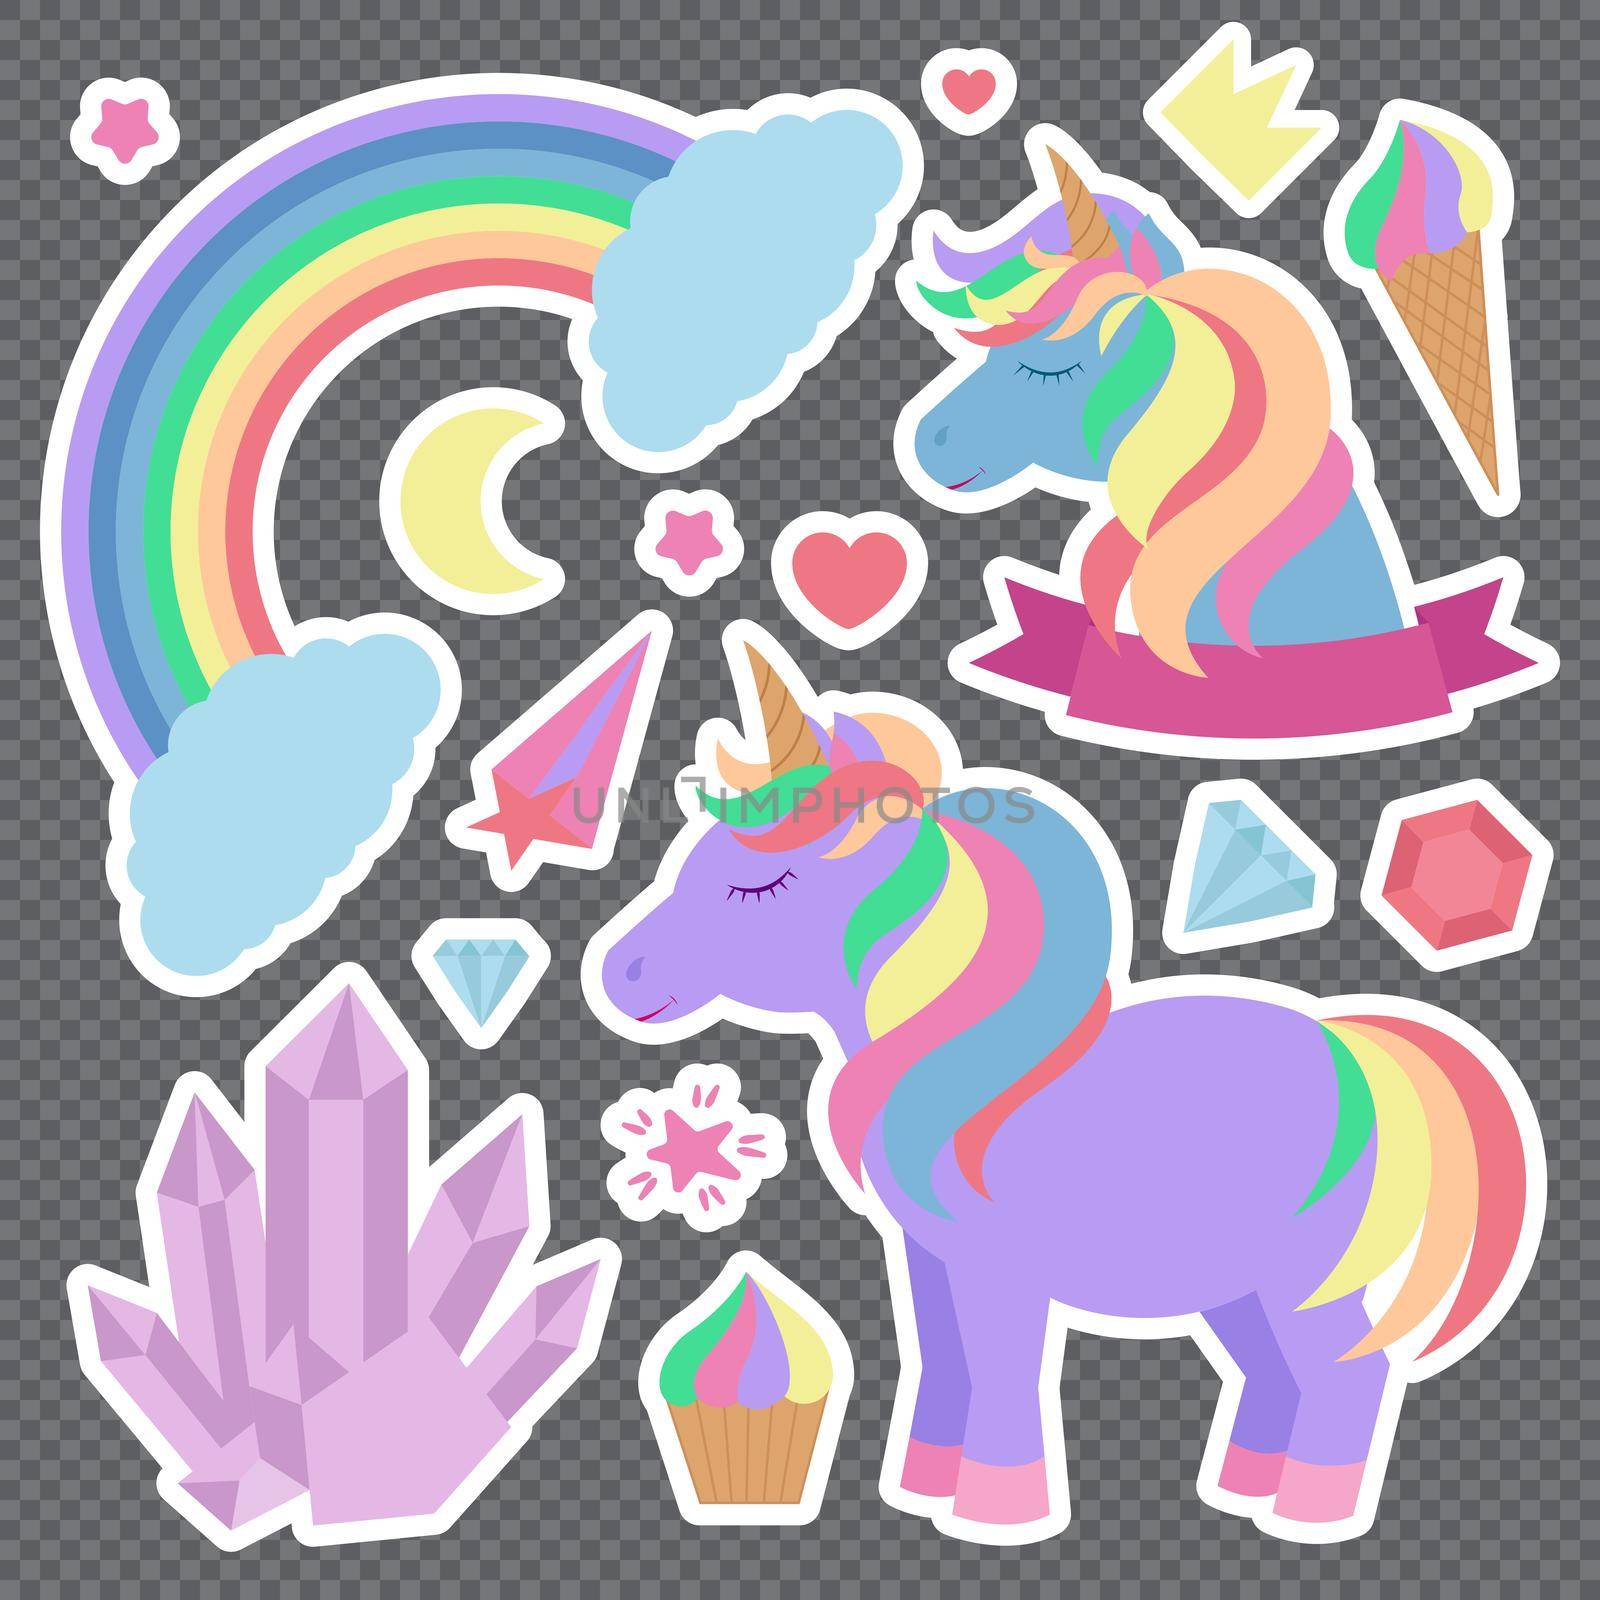 Cute unicorns and other elements. Set of stickers on background by Marin4ik